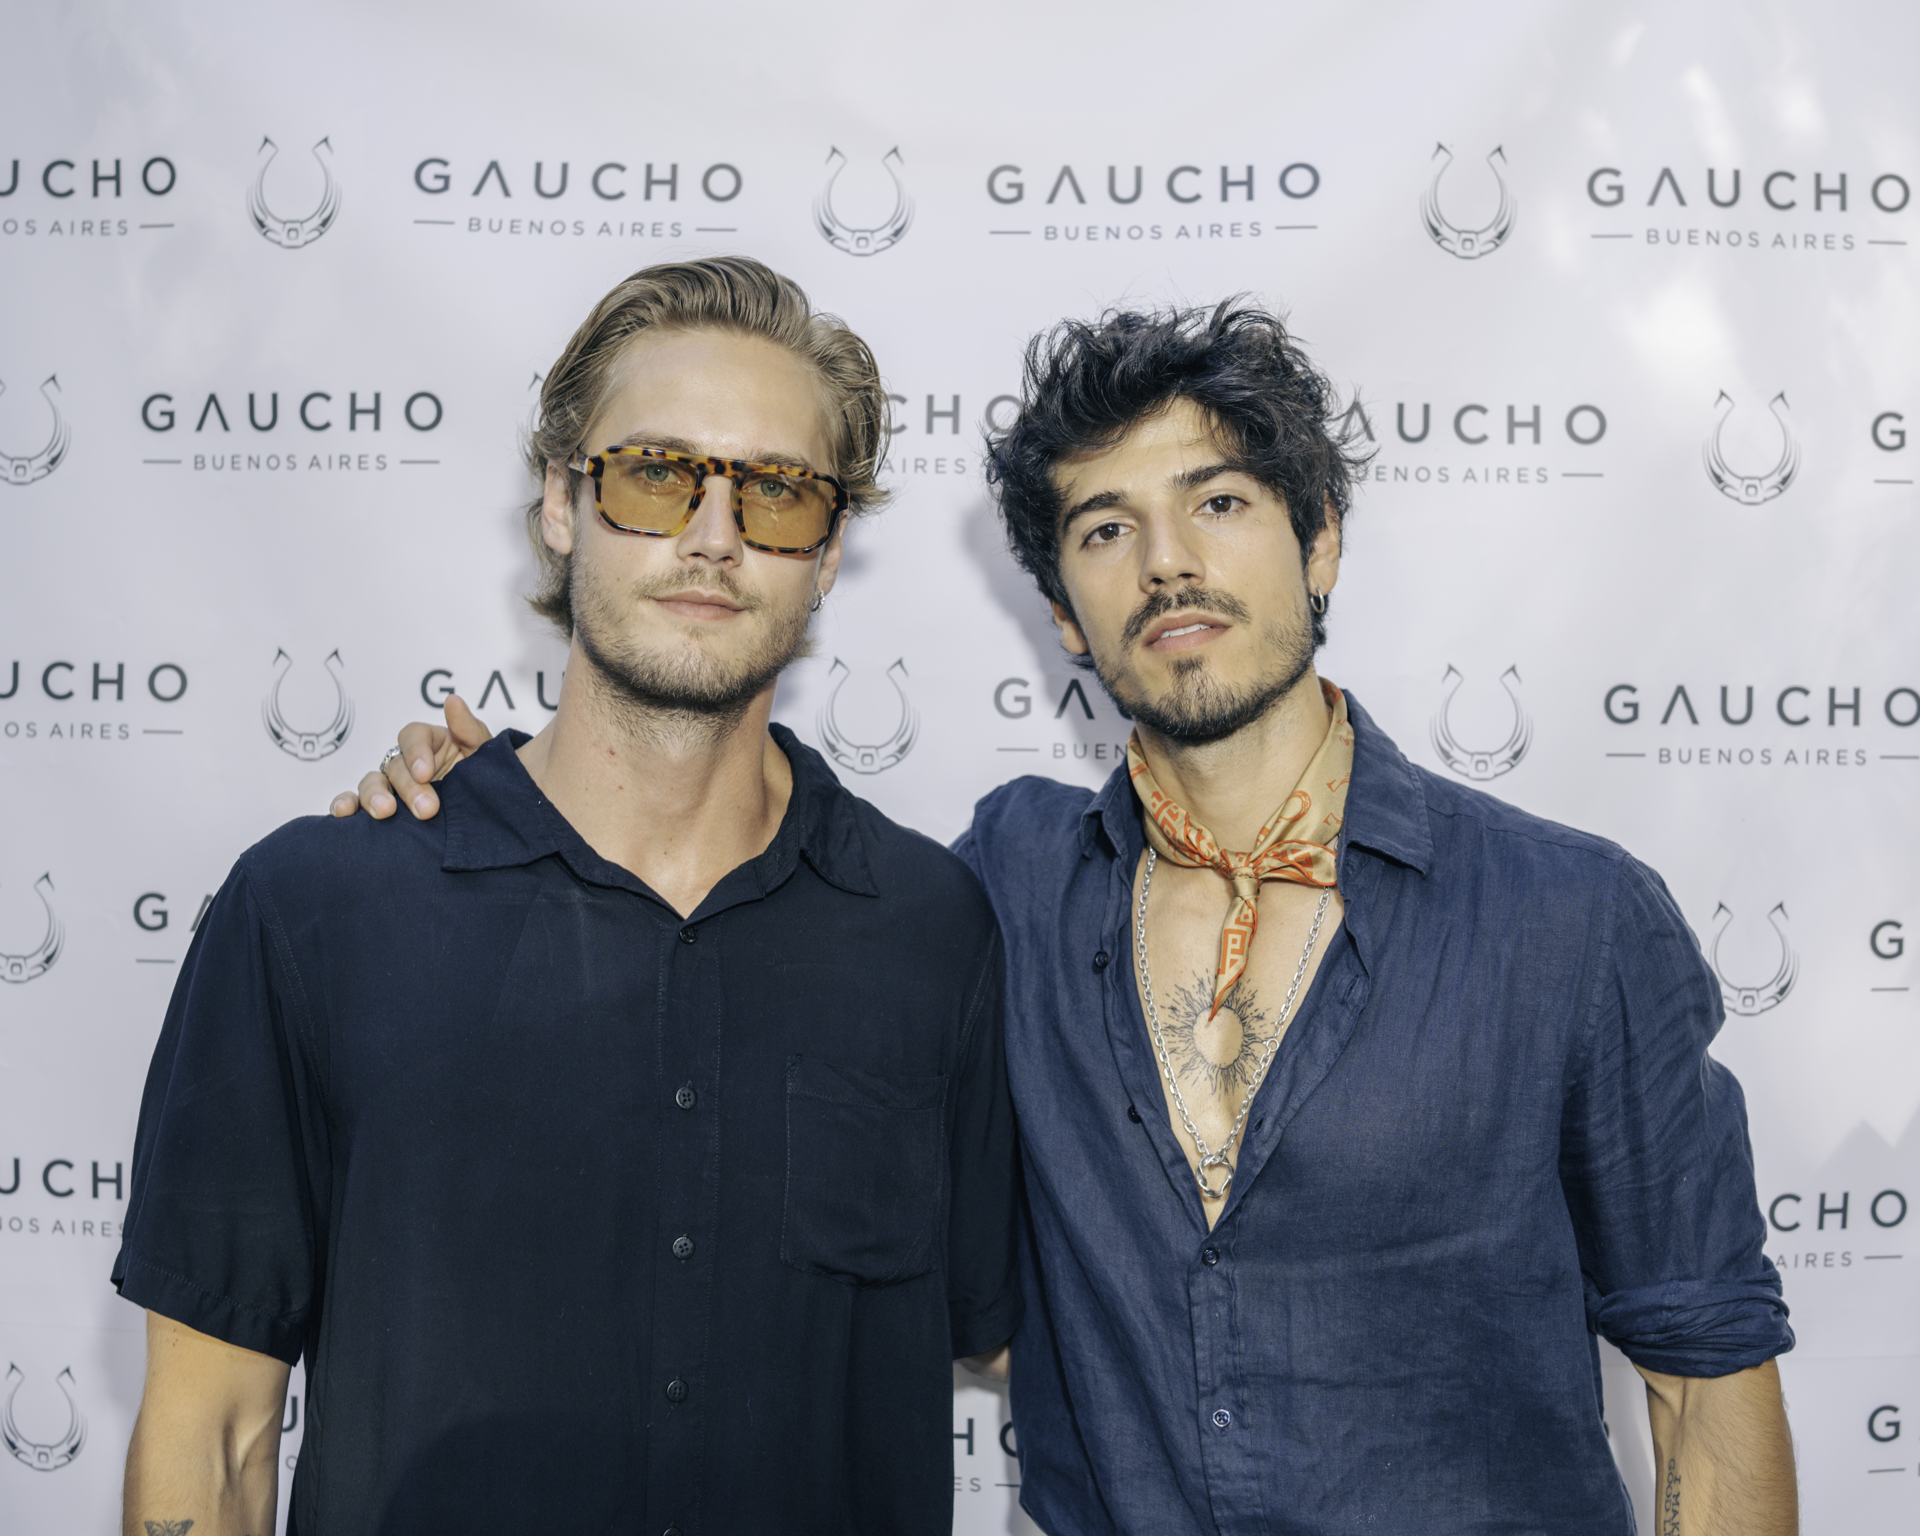 2_Actor-Model_Neels_Visser_(l)_and_Creative_Director_Lautaro_Garcia_de_la_Peña_(r)_celebrate_the_launch_of_the_GAUCHO_global_retail_store_opening_and_new_flagship_location_in_the_Miami_Design_District_(Photo_Credi.png